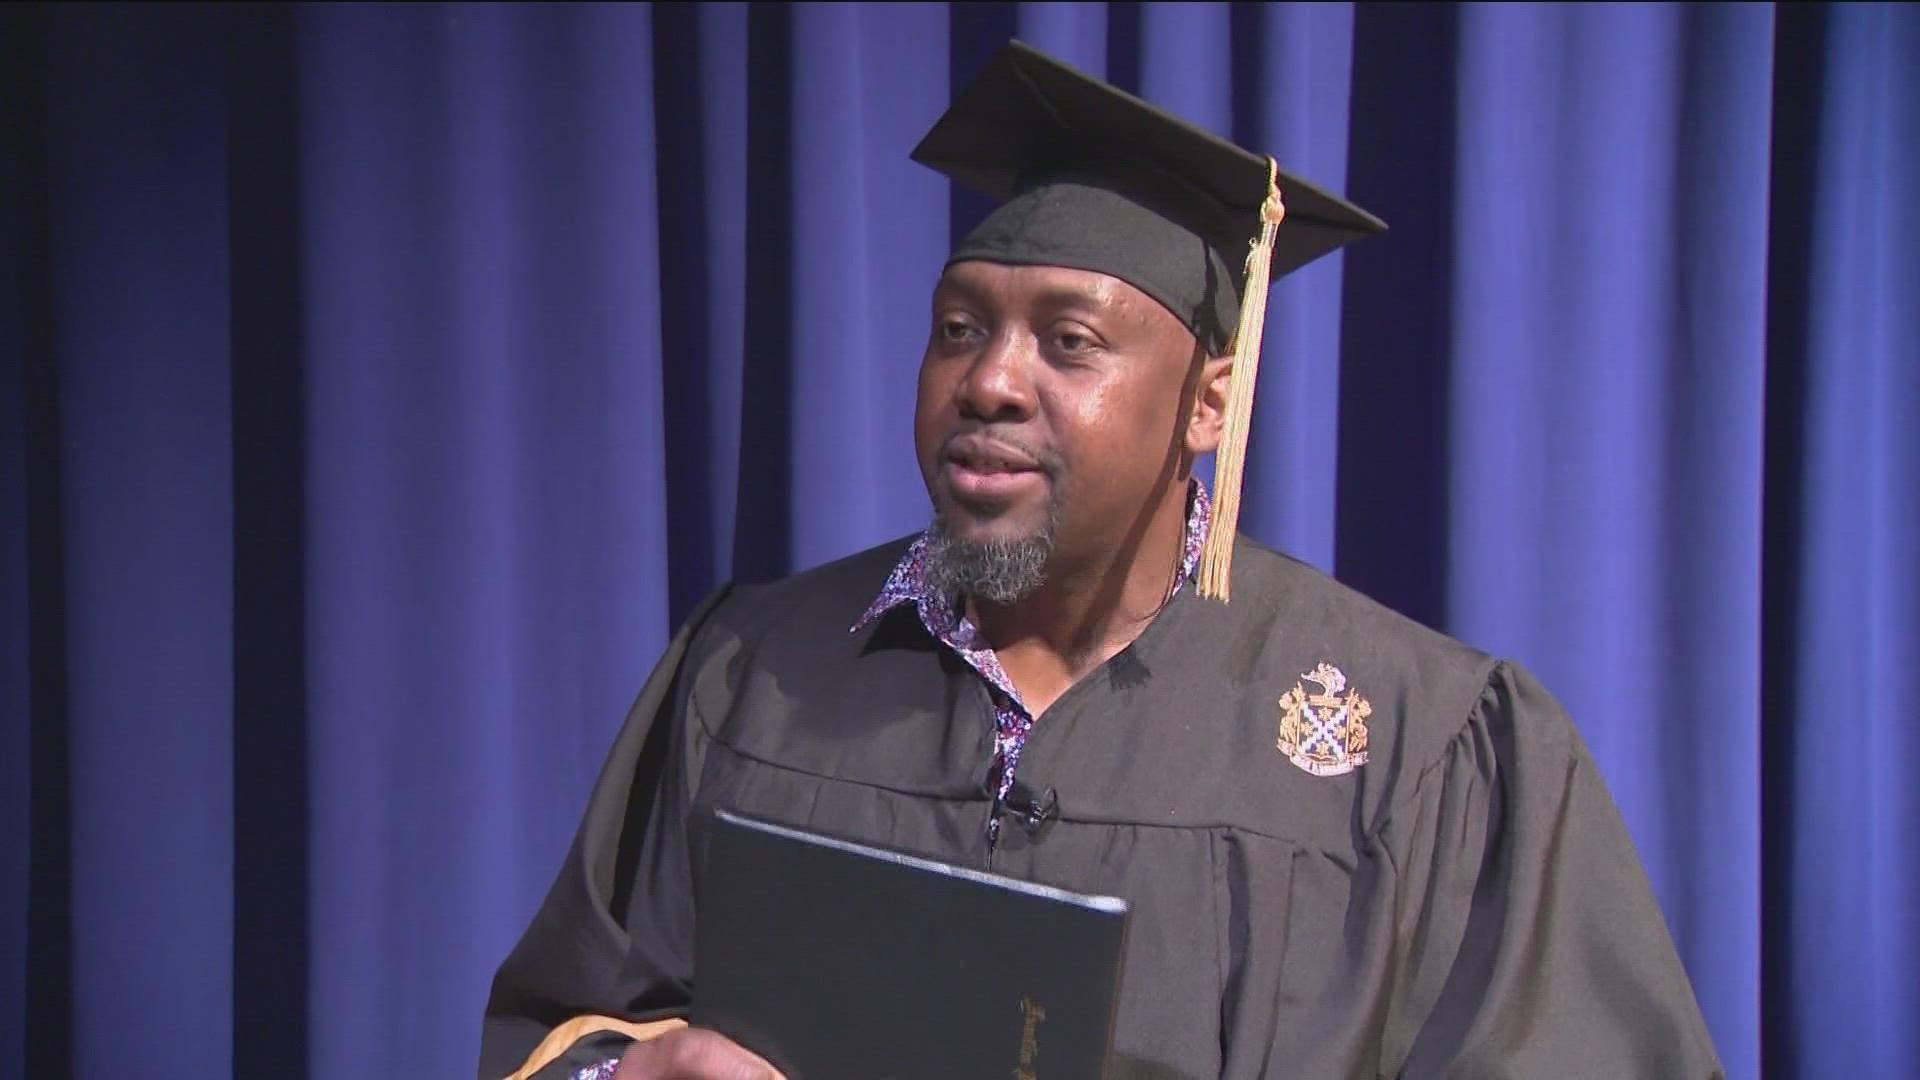 Austin ISD hosted a belated "graduation" ceremony for veterans who went to war instead of finishing high school.